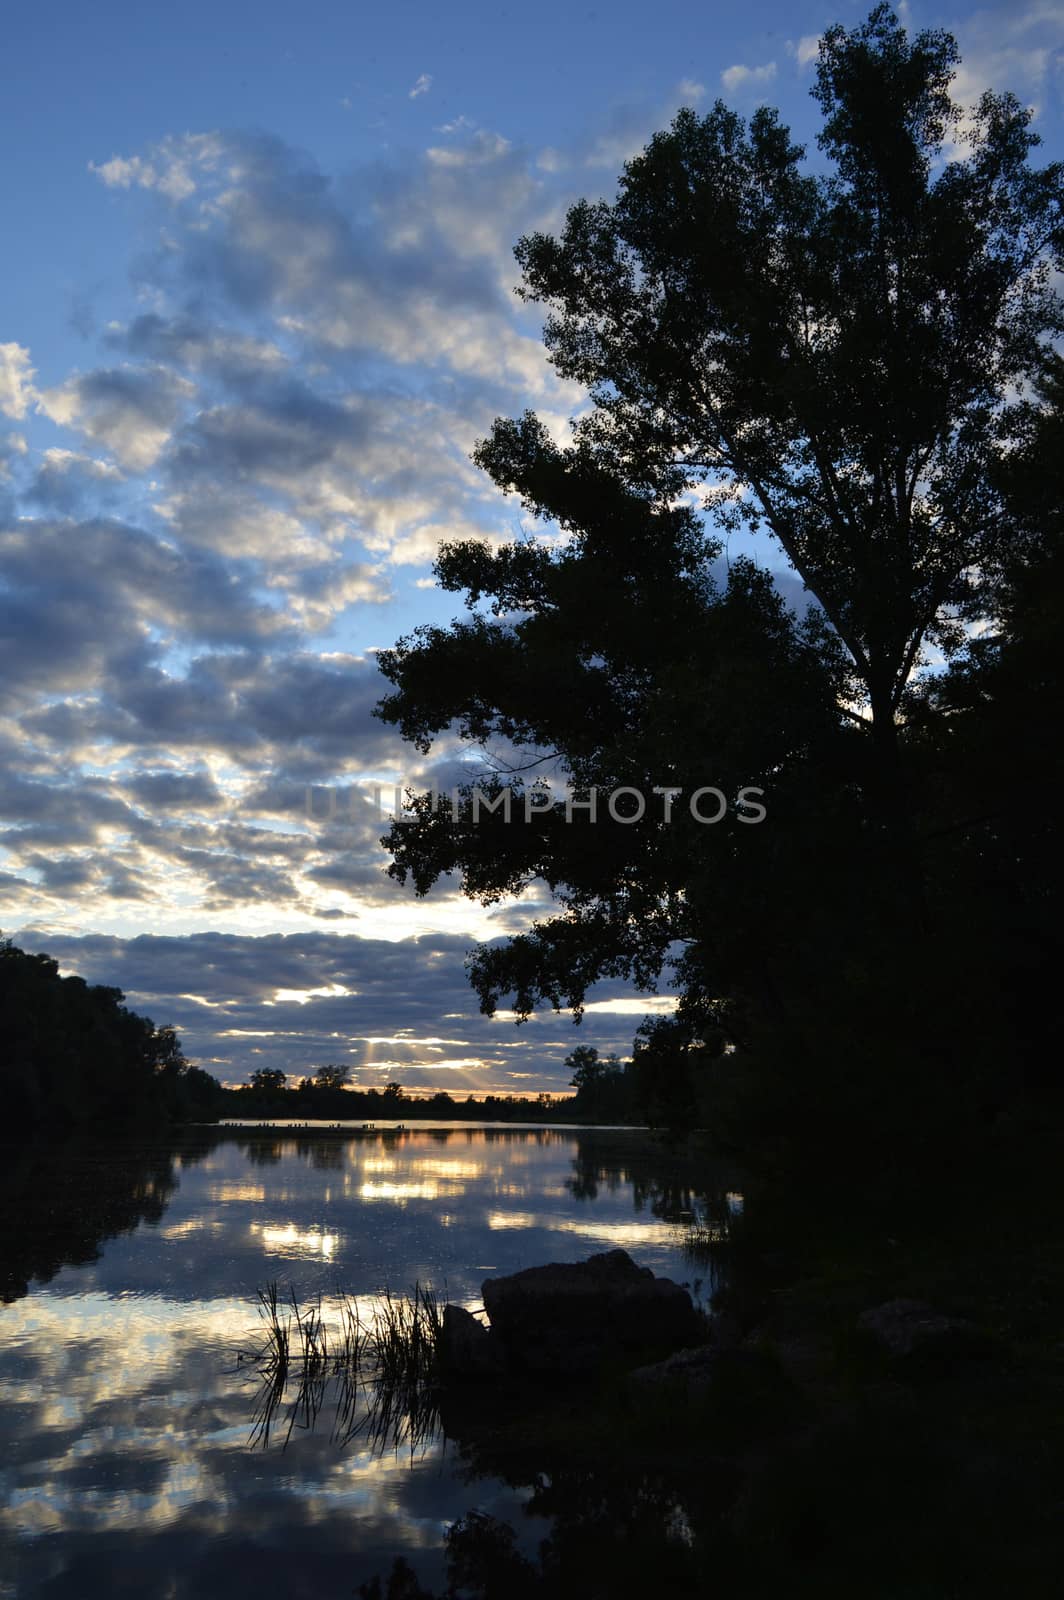 beautiful evening landscape with river